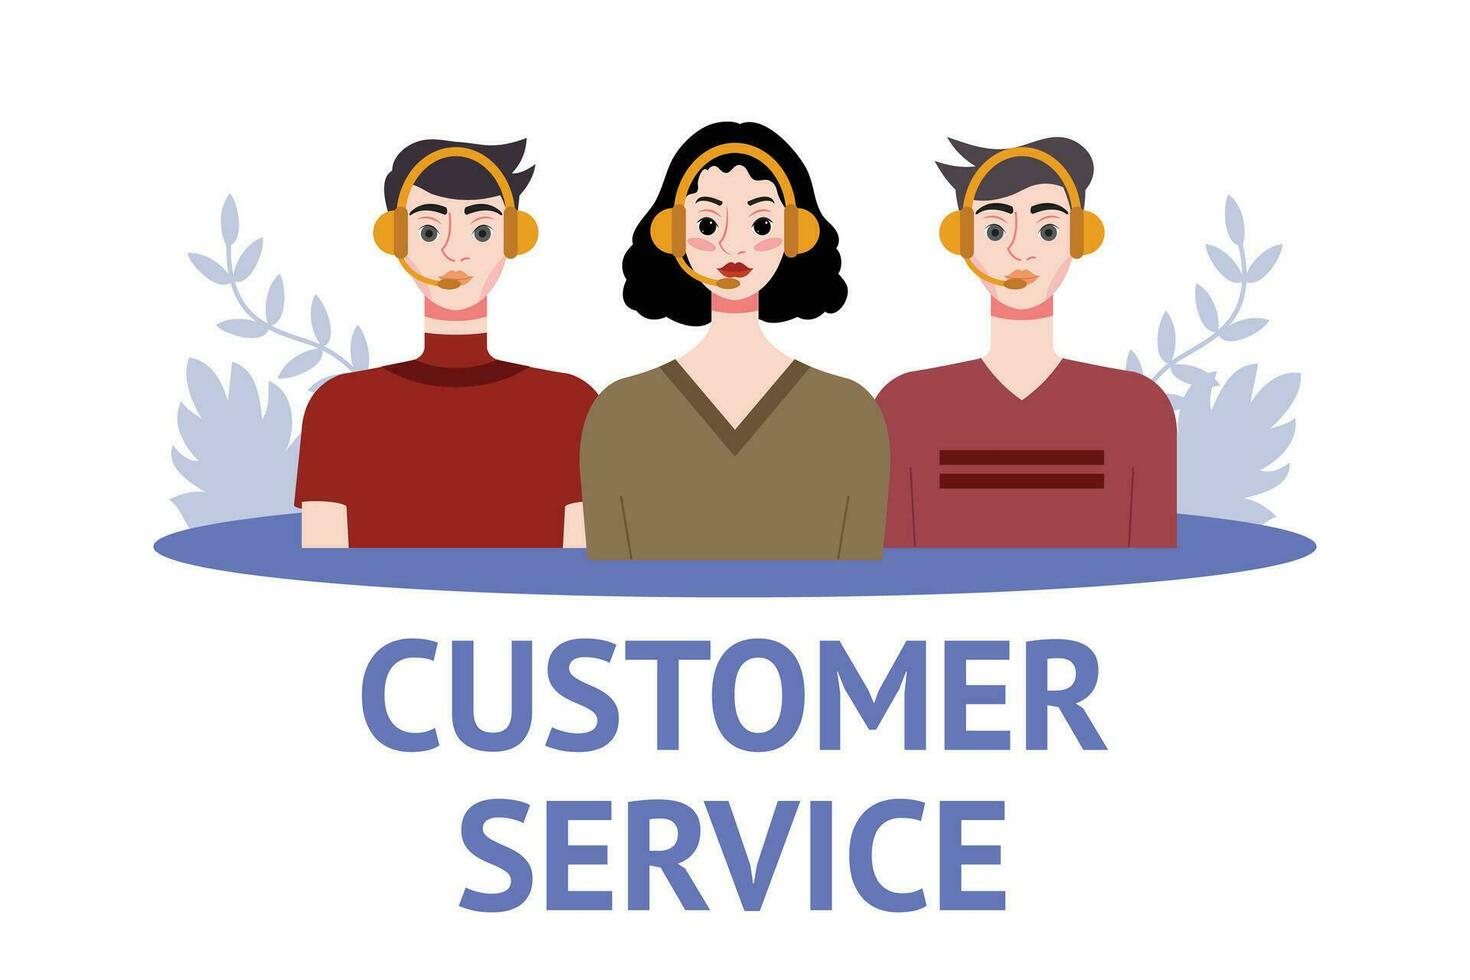 Customer service concept. People with headsets. Vector illustration in flat style